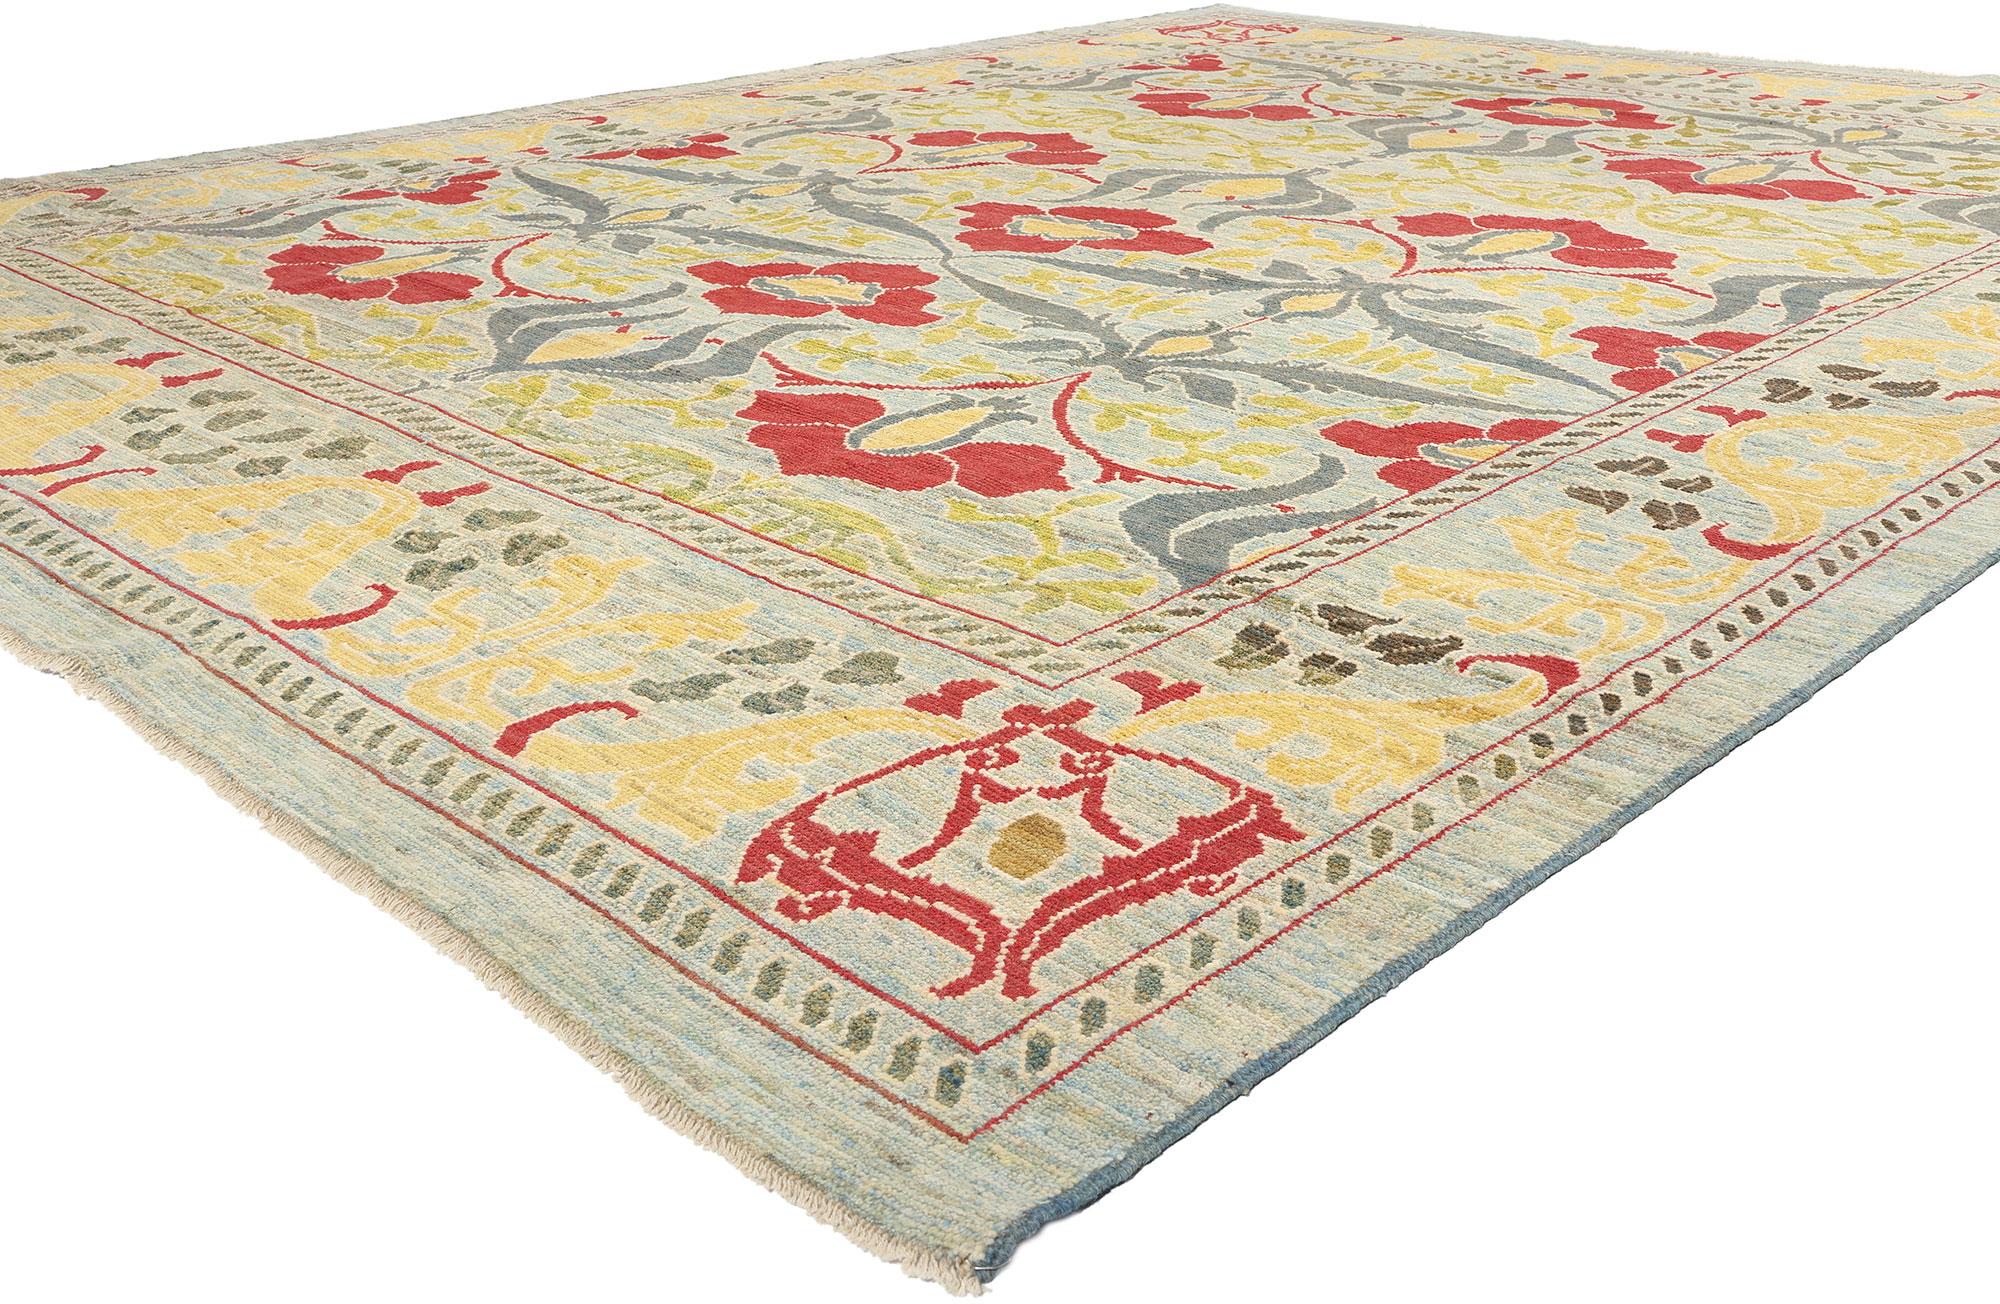 60744 William Morris Turkish Oushak Rug, 11'07 x 14'10. In this hand-knotted wool modern Turkish Oushak rug, contemporary elegance merges seamlessly with the timeless allure of British Arts & Crafts style. Drawing inspiration from the works of